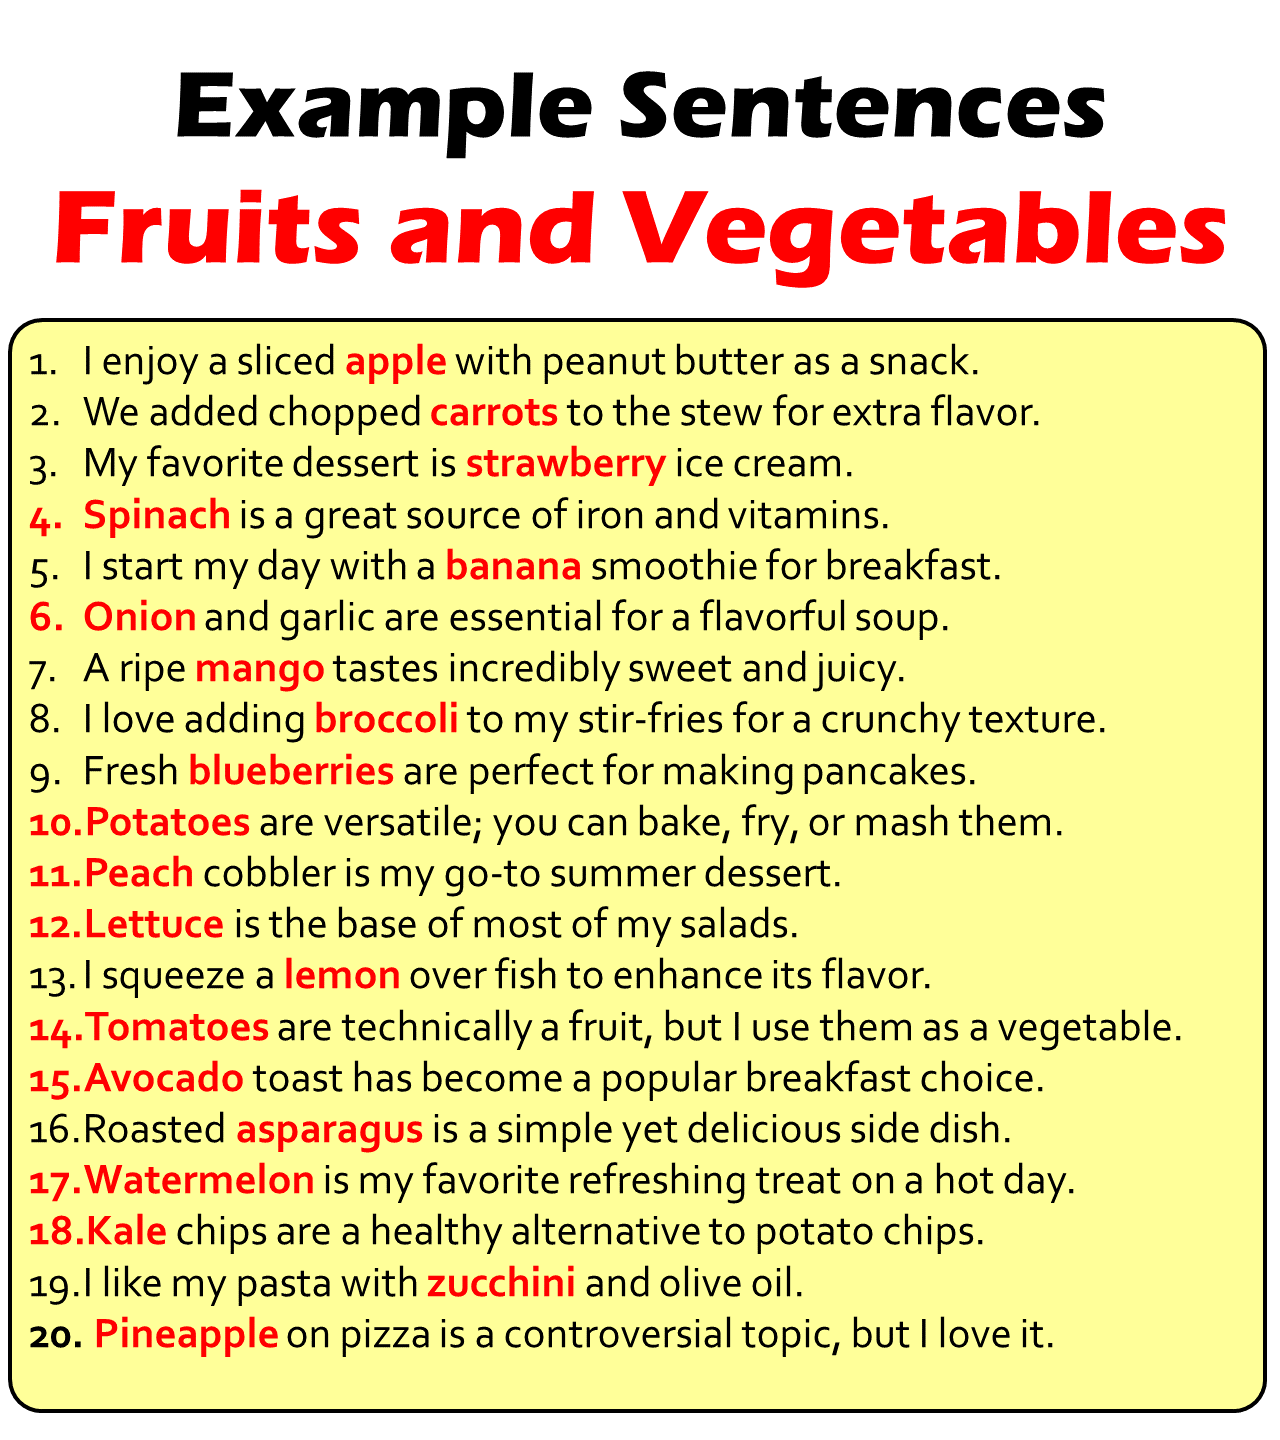 Example Sentences Using Fruits and Vegetables